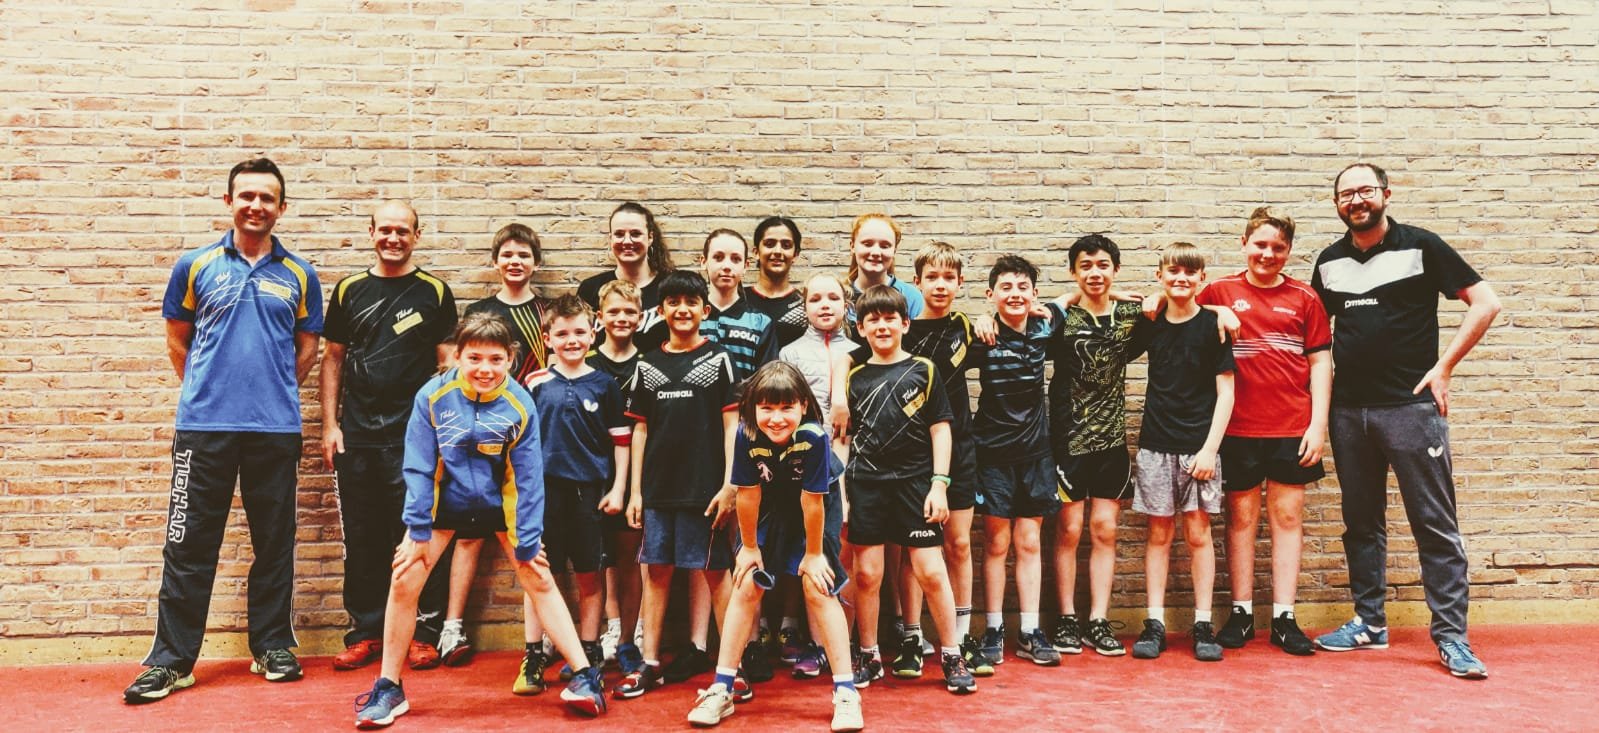 Day 1 in Belgium – Training with VTTL Mini Cadet national players!